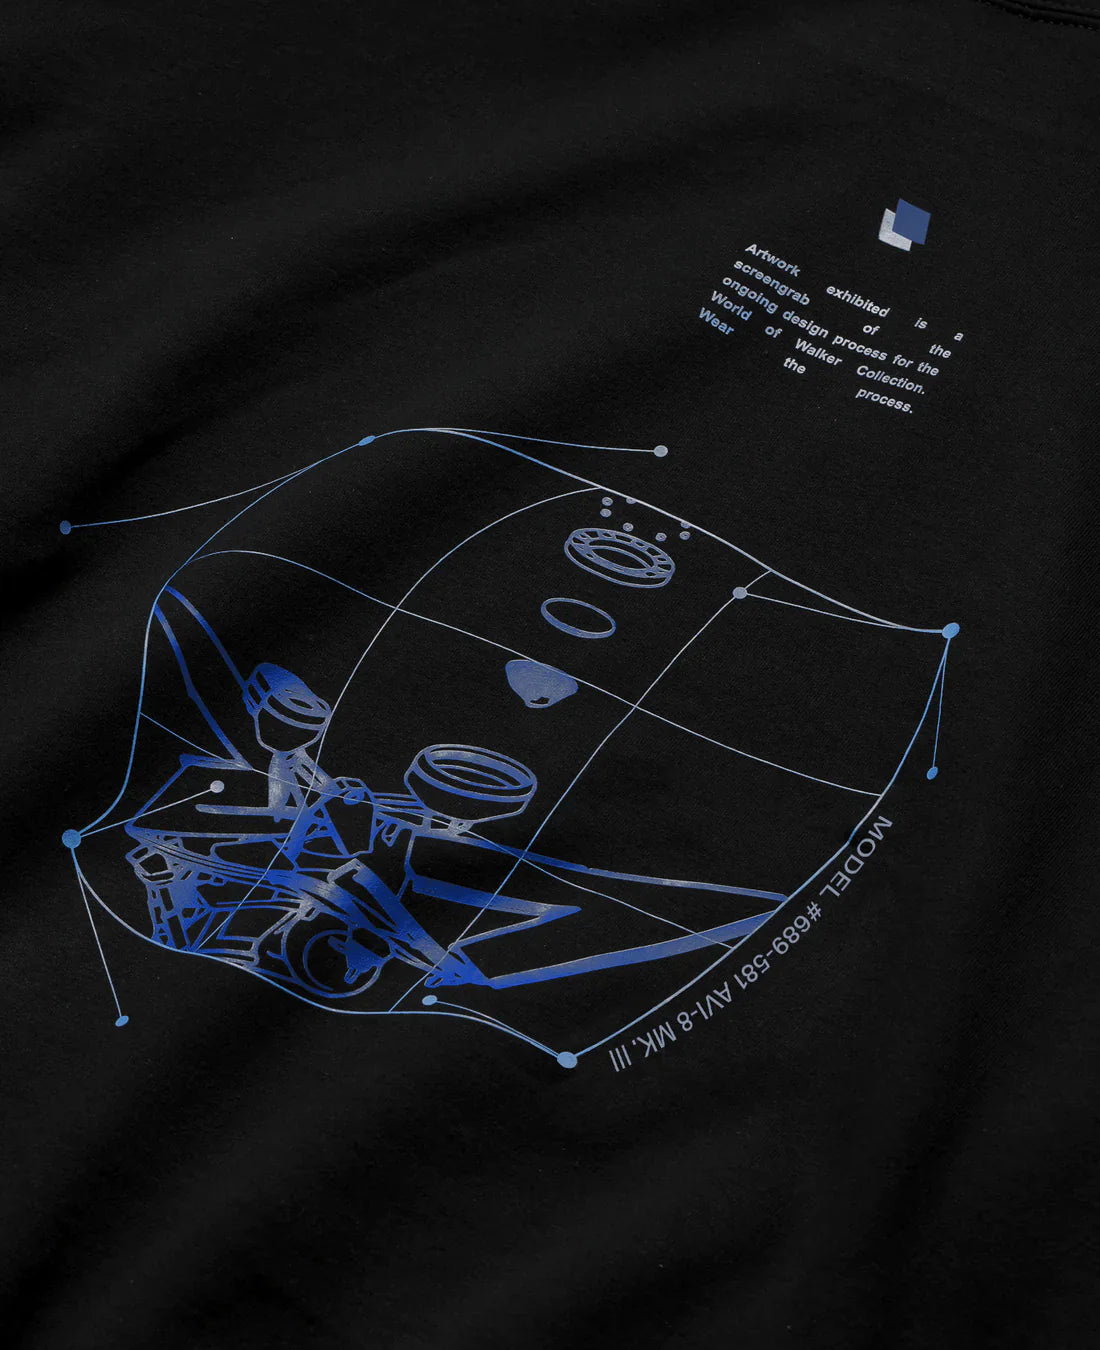 Rear close-up view of Alan Walker Blueprint Hoodie featuring intricate blueprint graphic design in blue on black fabric, illustrating the creative process of the Walker Wear Collection.